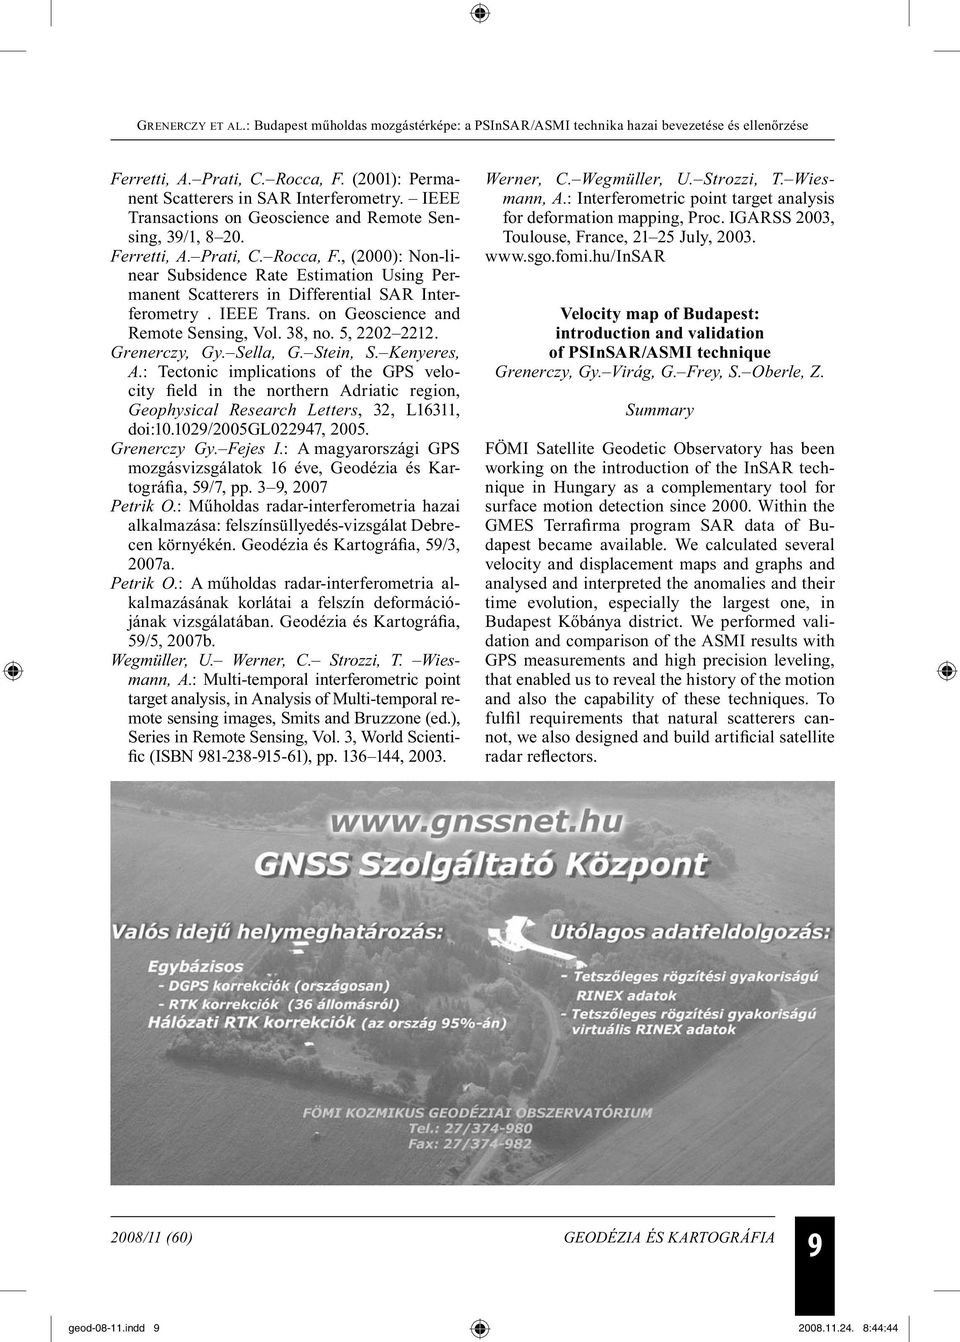 : Tectonic implications of the GPS velocity field in the northern Adriatic region, Geophysical Research Letters, 32, L16311, doi:10.1029/2005gl022947, 2005. Grenerczy Gy. Fejes I.